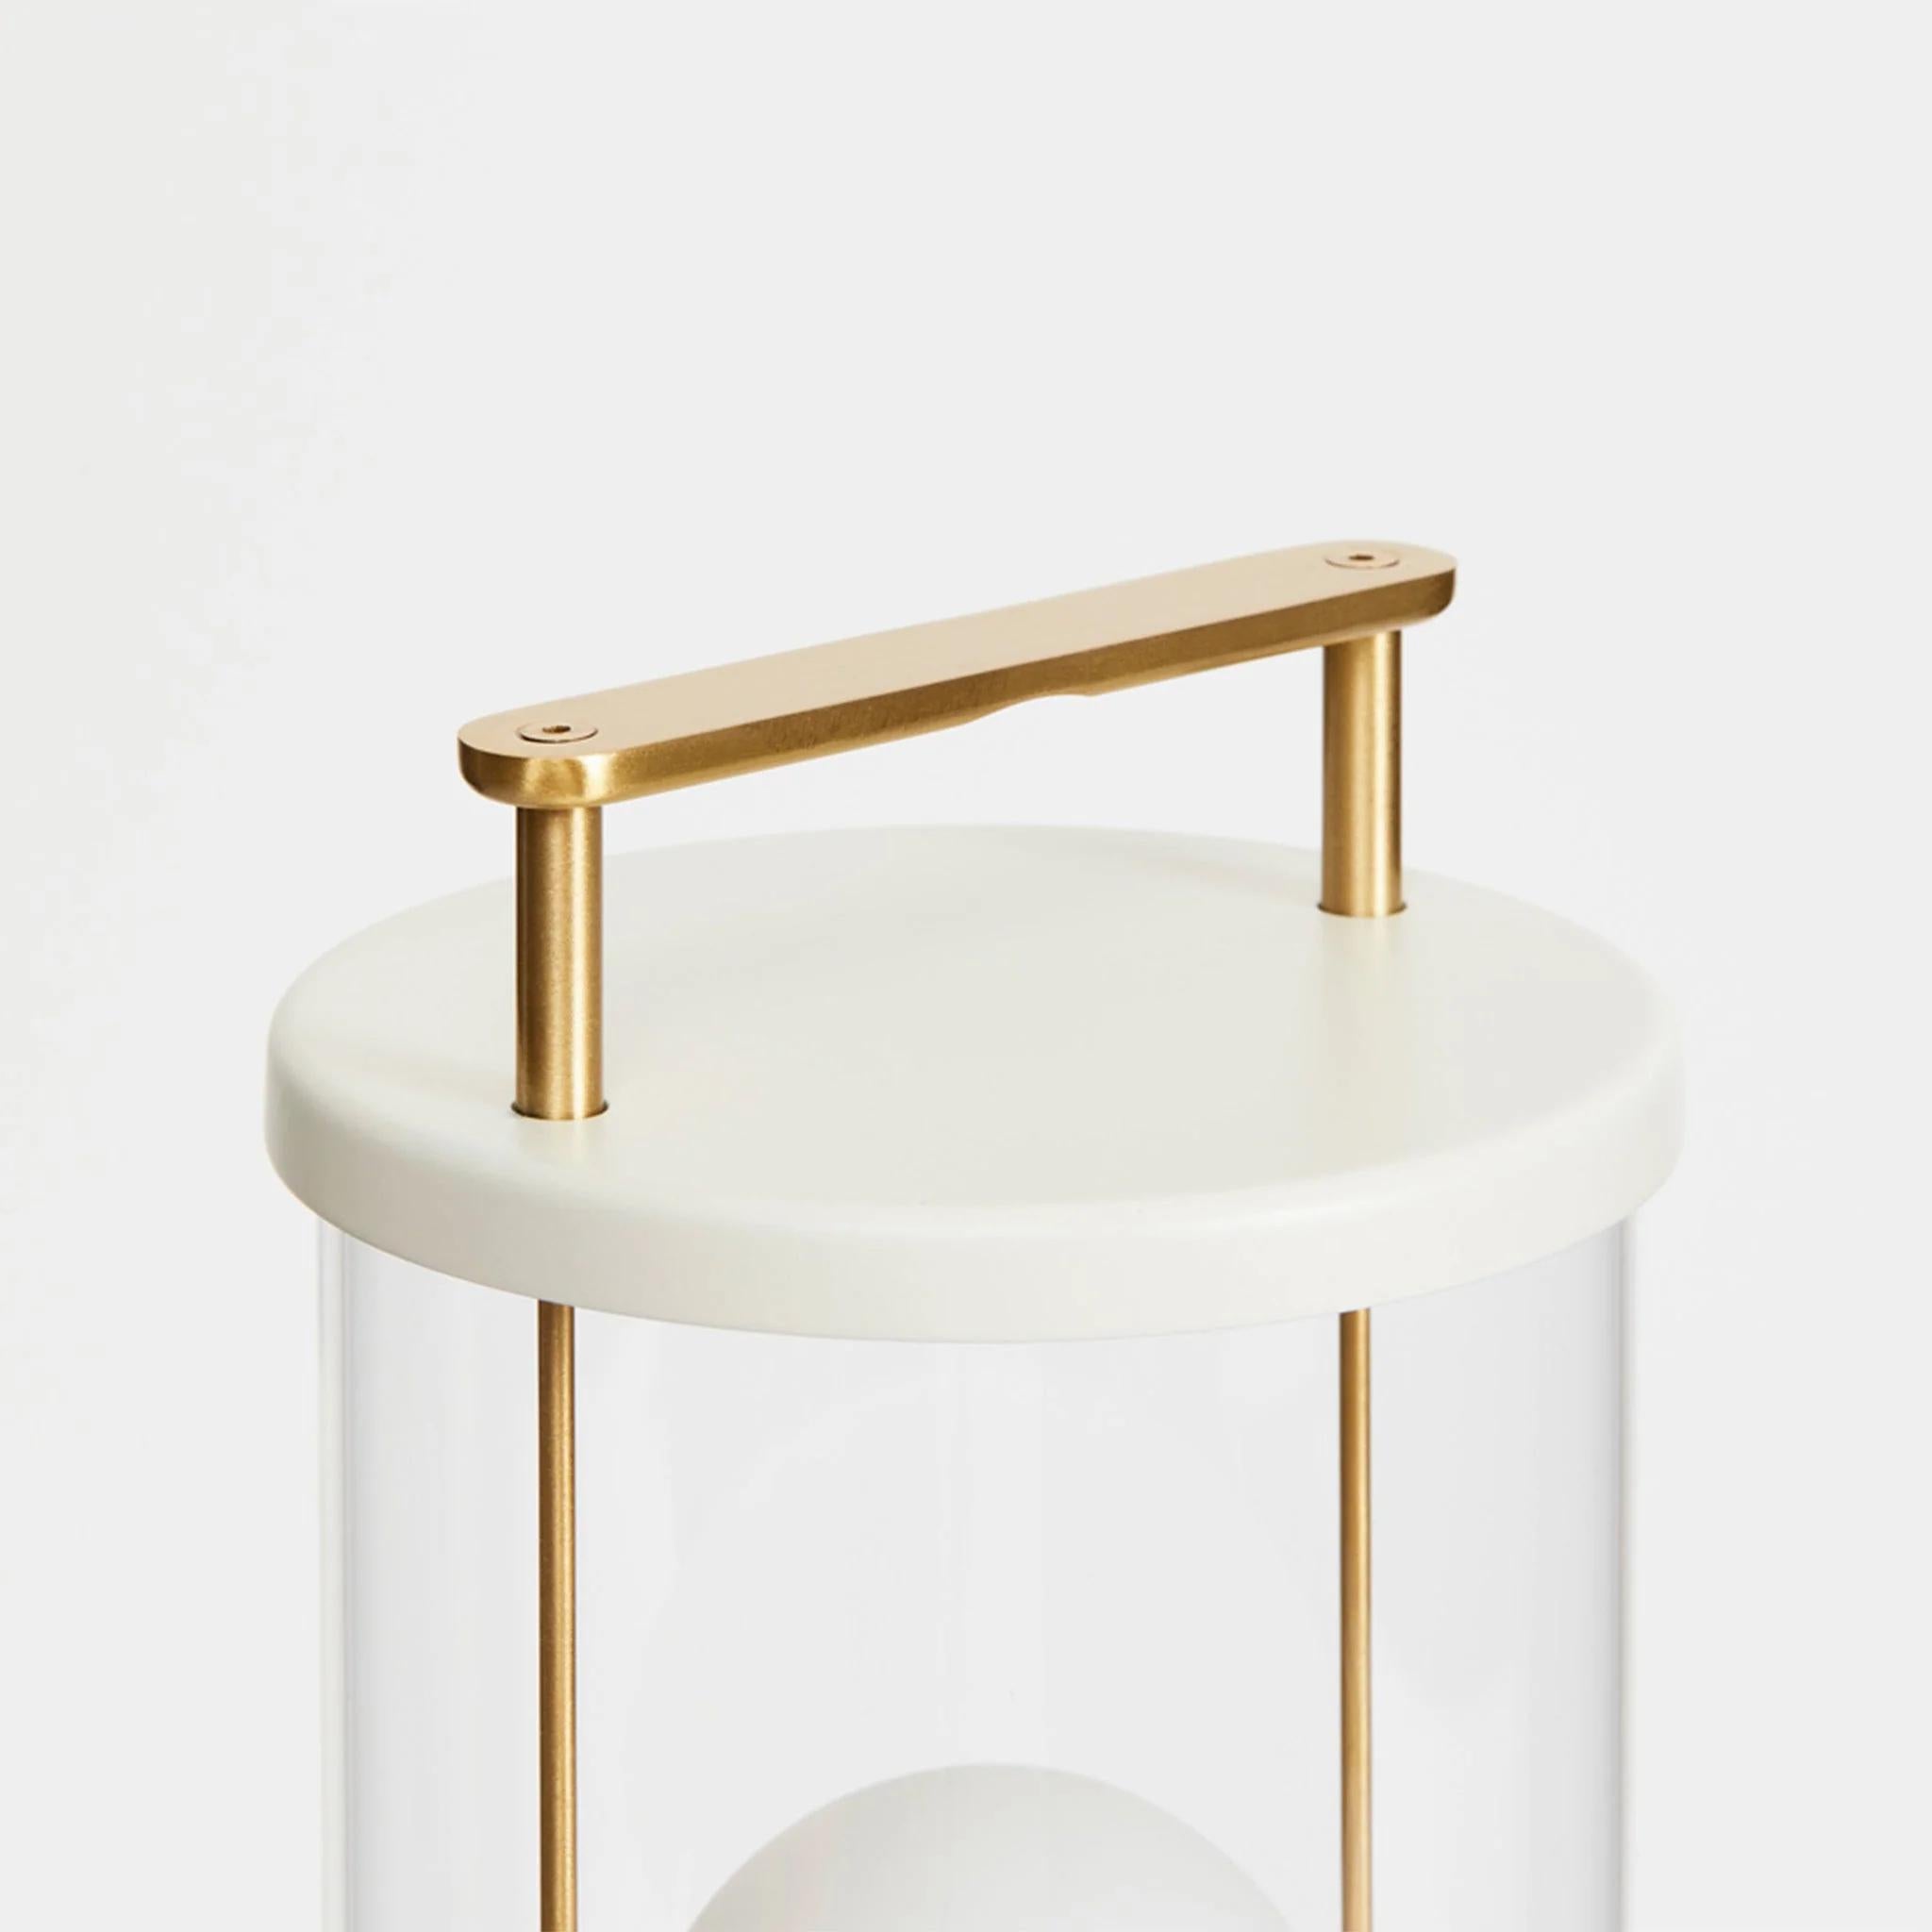 Metal 'The Muse' Portable Lamp by Farrow & Ball x Tala in Candlenut White For Sale